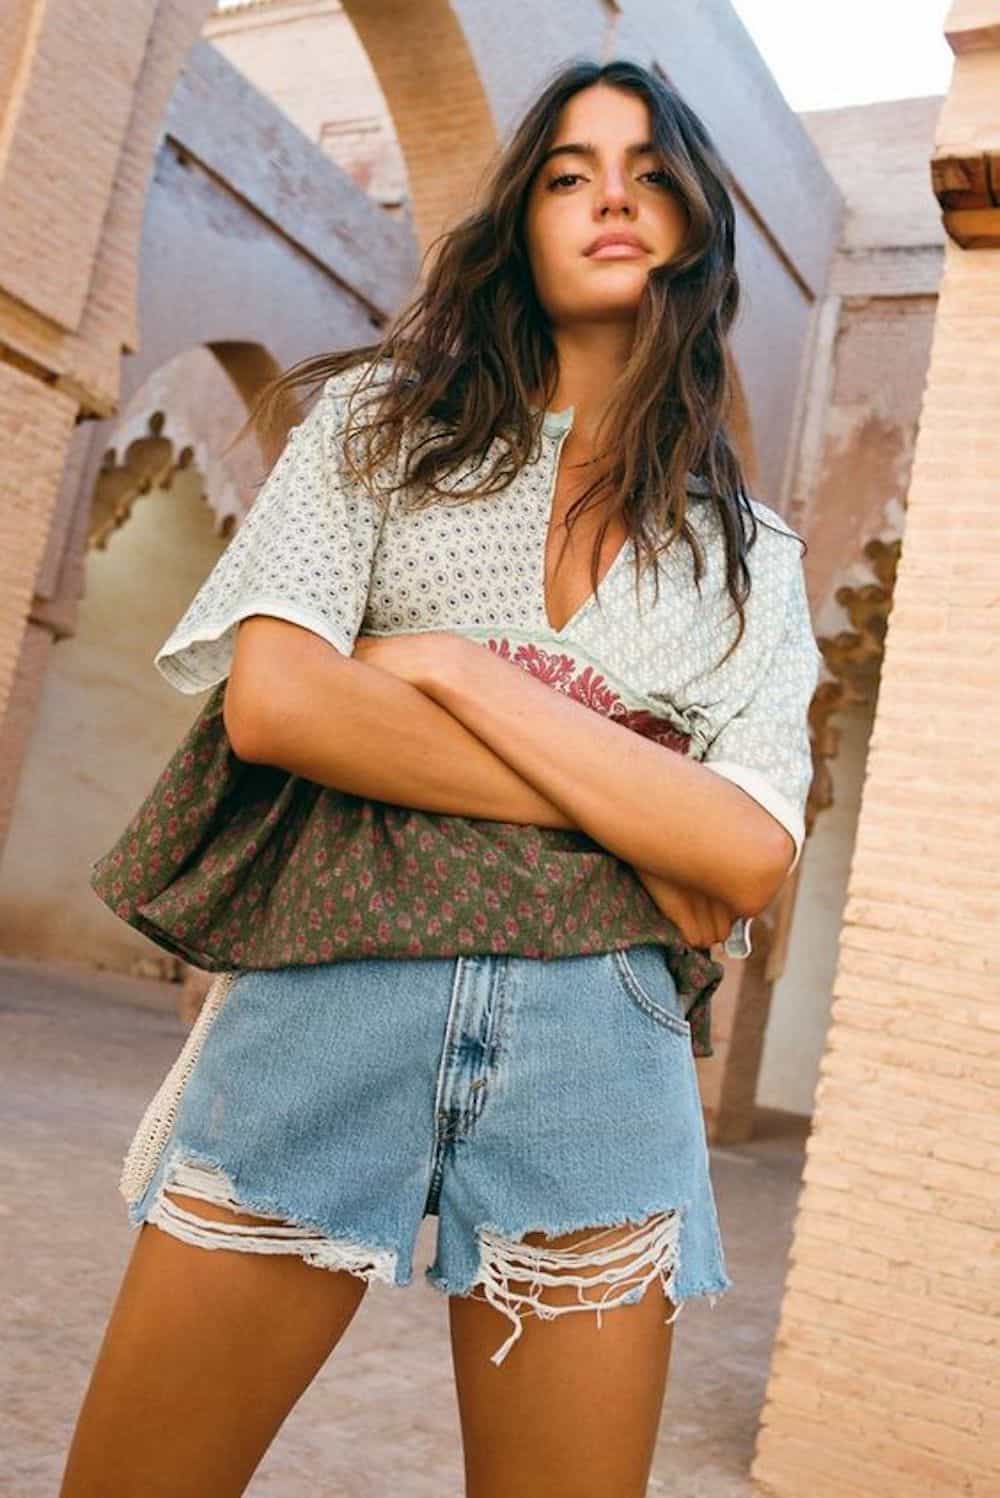 vintage filtered image of a woman wearing a floral top and denim shorts